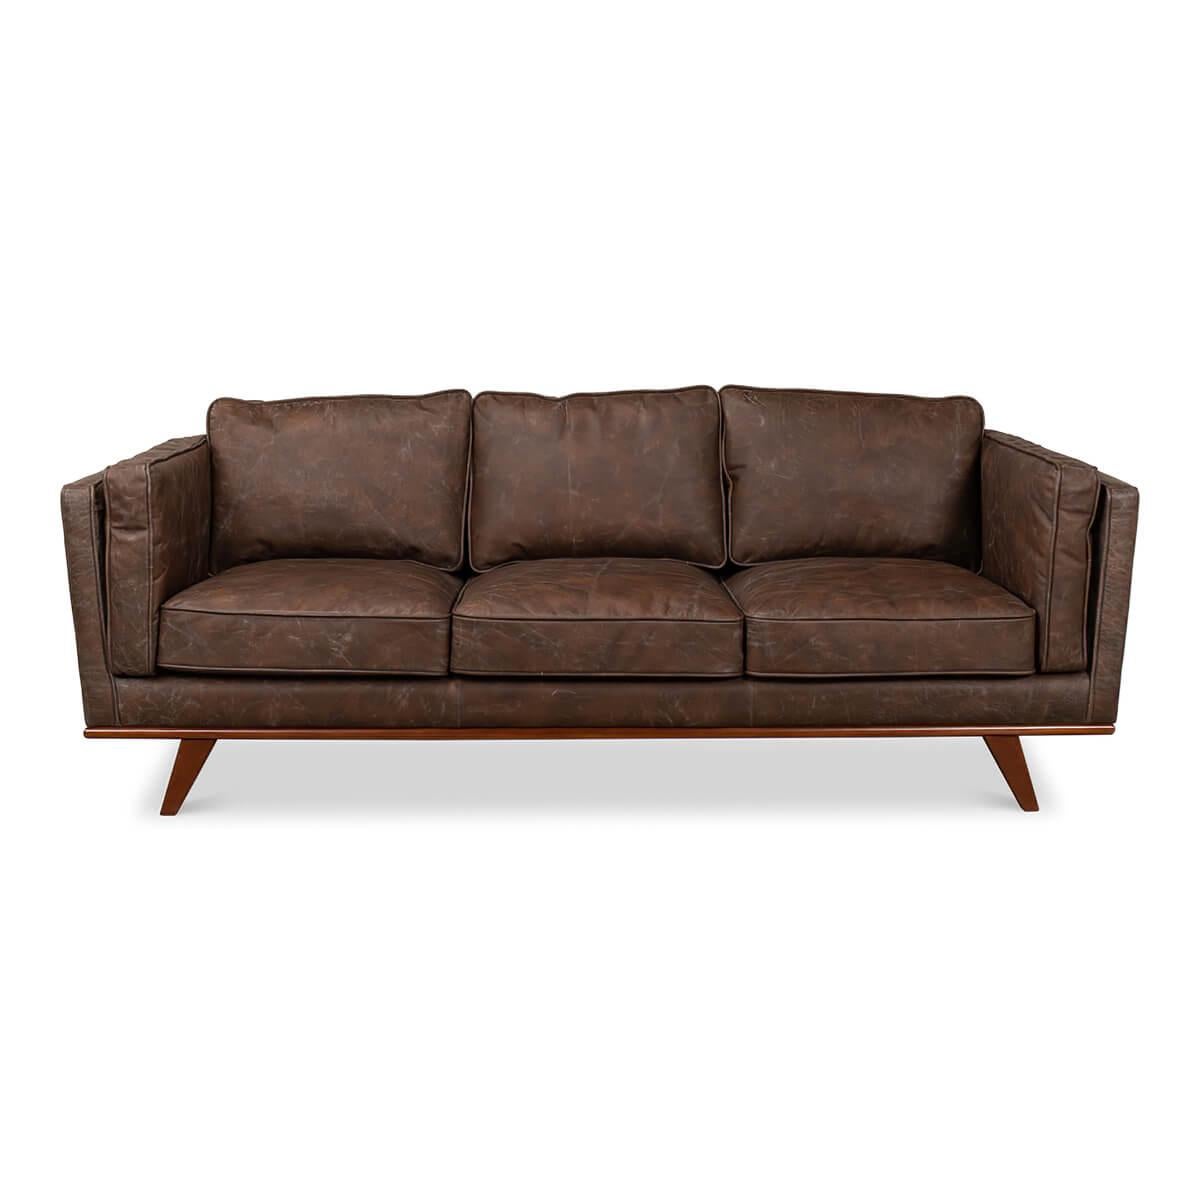 A European Mid Century Modern style three-seat sofa with antique brown leather and a dark stained maple frame with out-flaring tapered legs.

Dimensions: 90